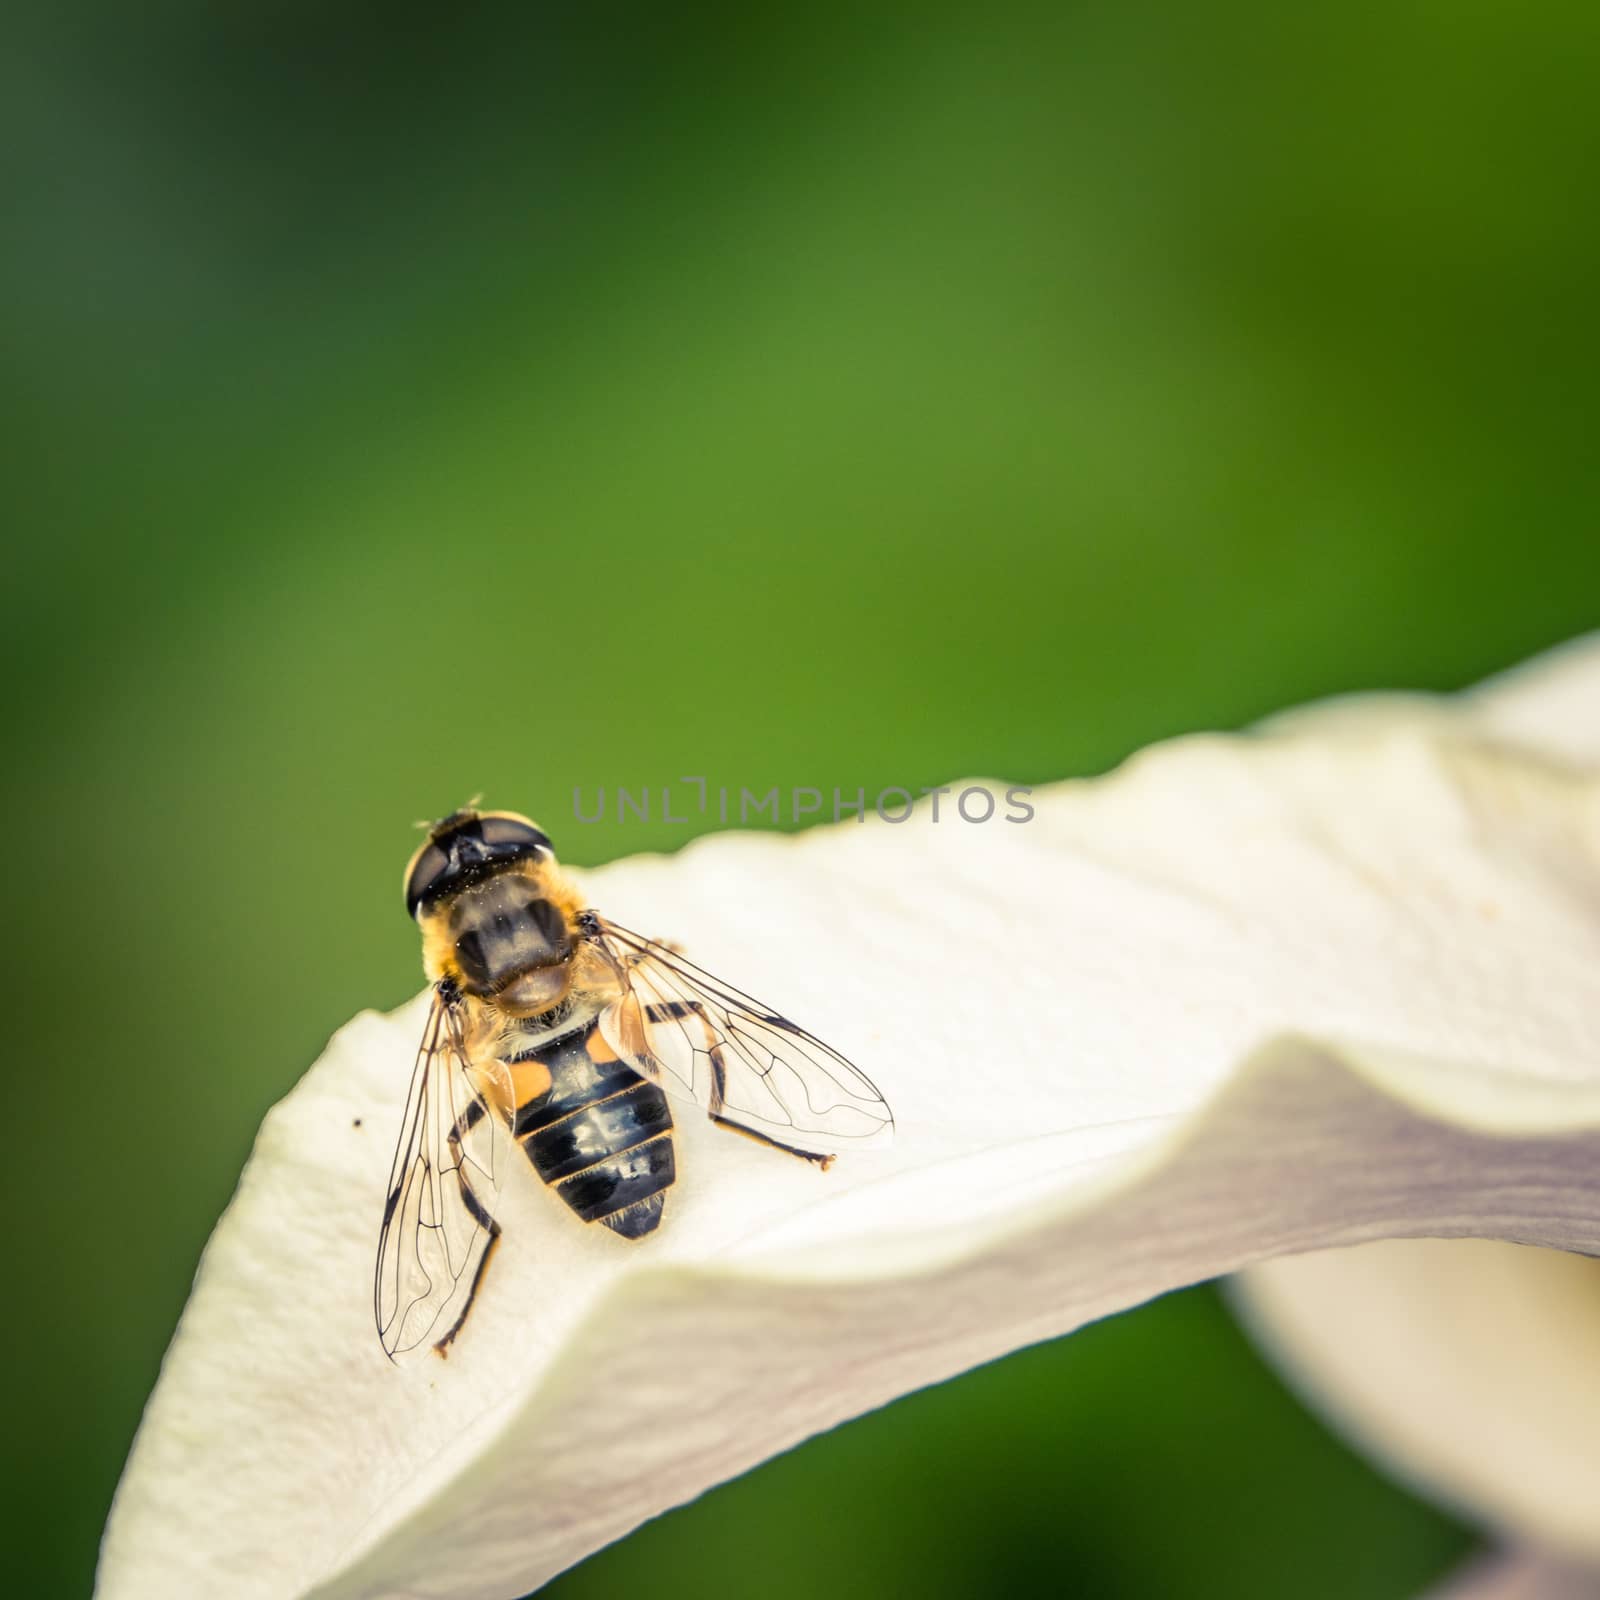 Close-Up Photo Of A Wasp On A Flower